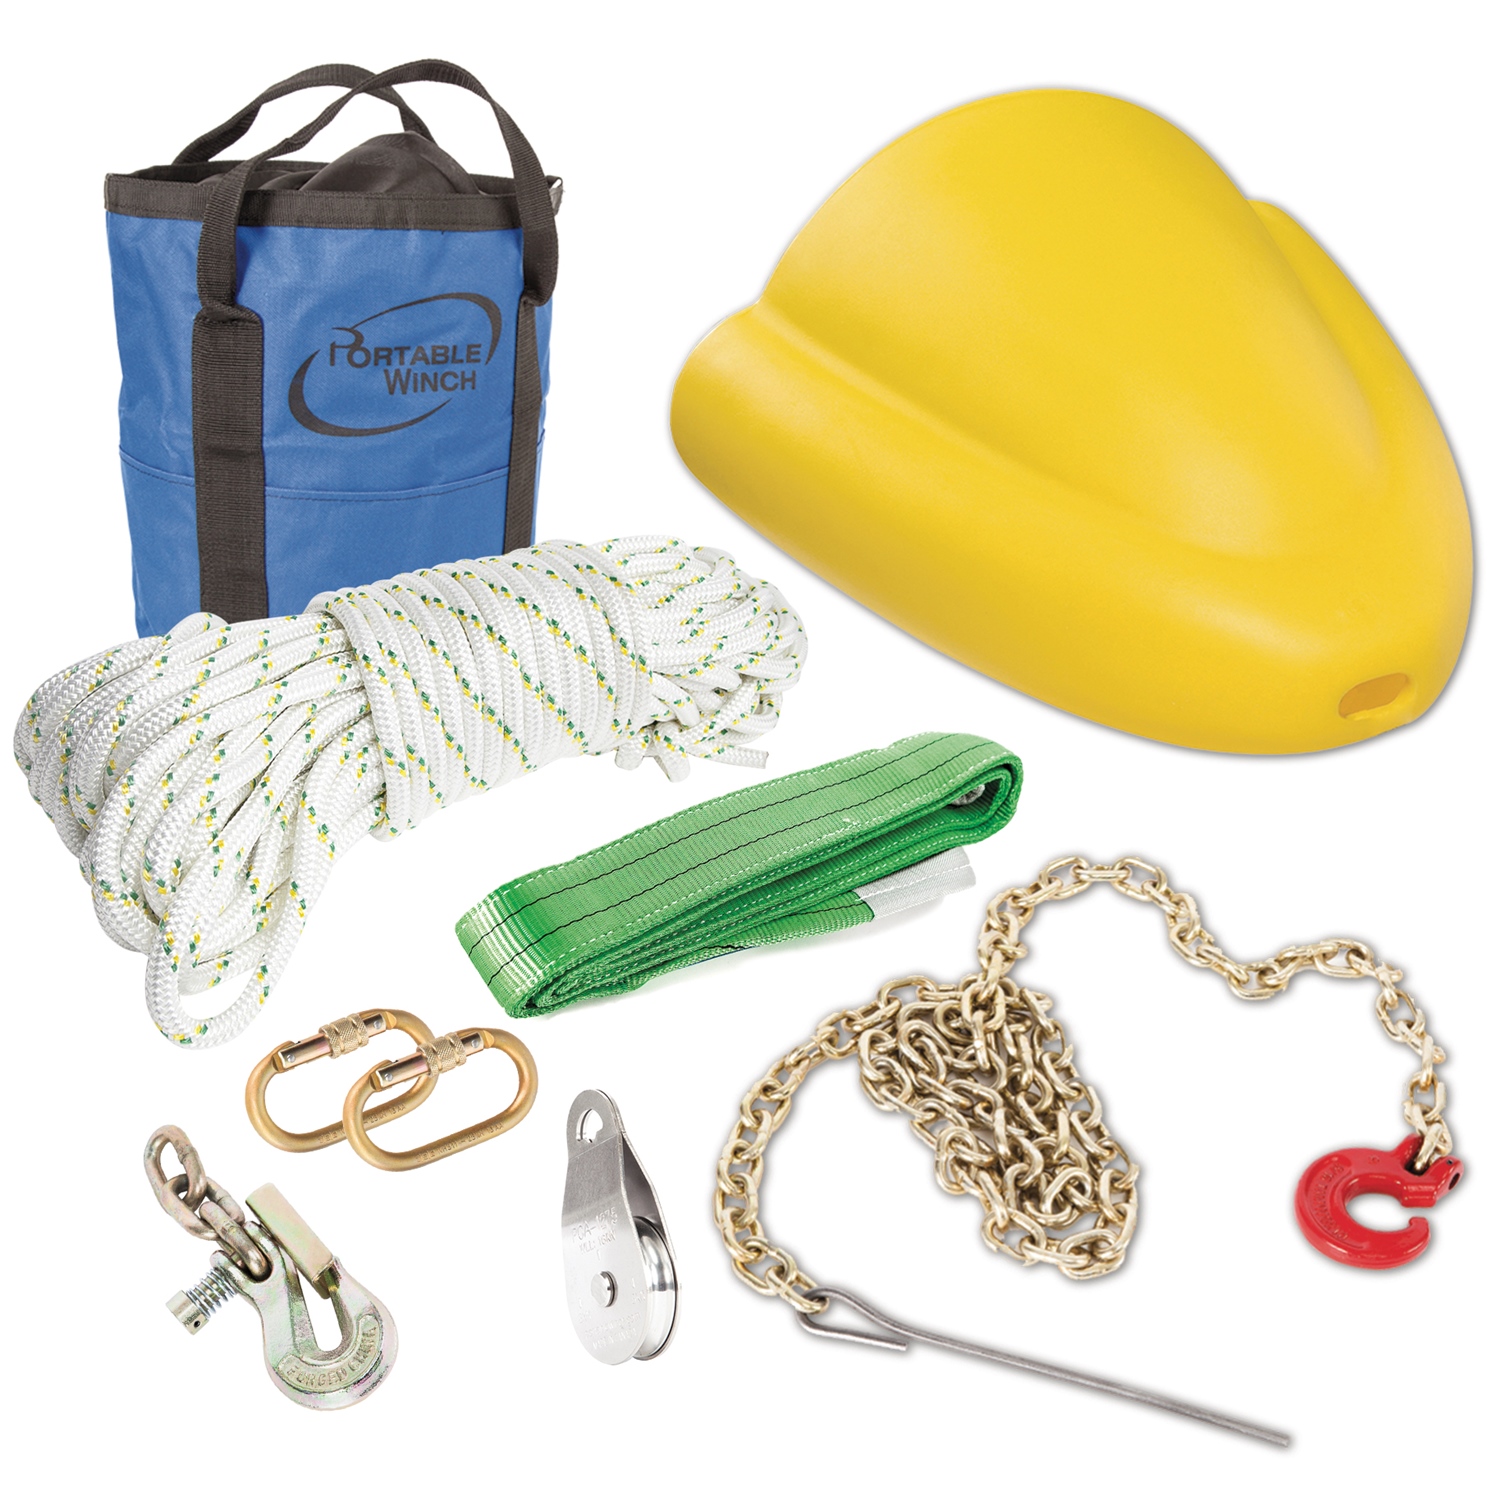 Portable Winch PCA-1005 Forestry Accessories Kit